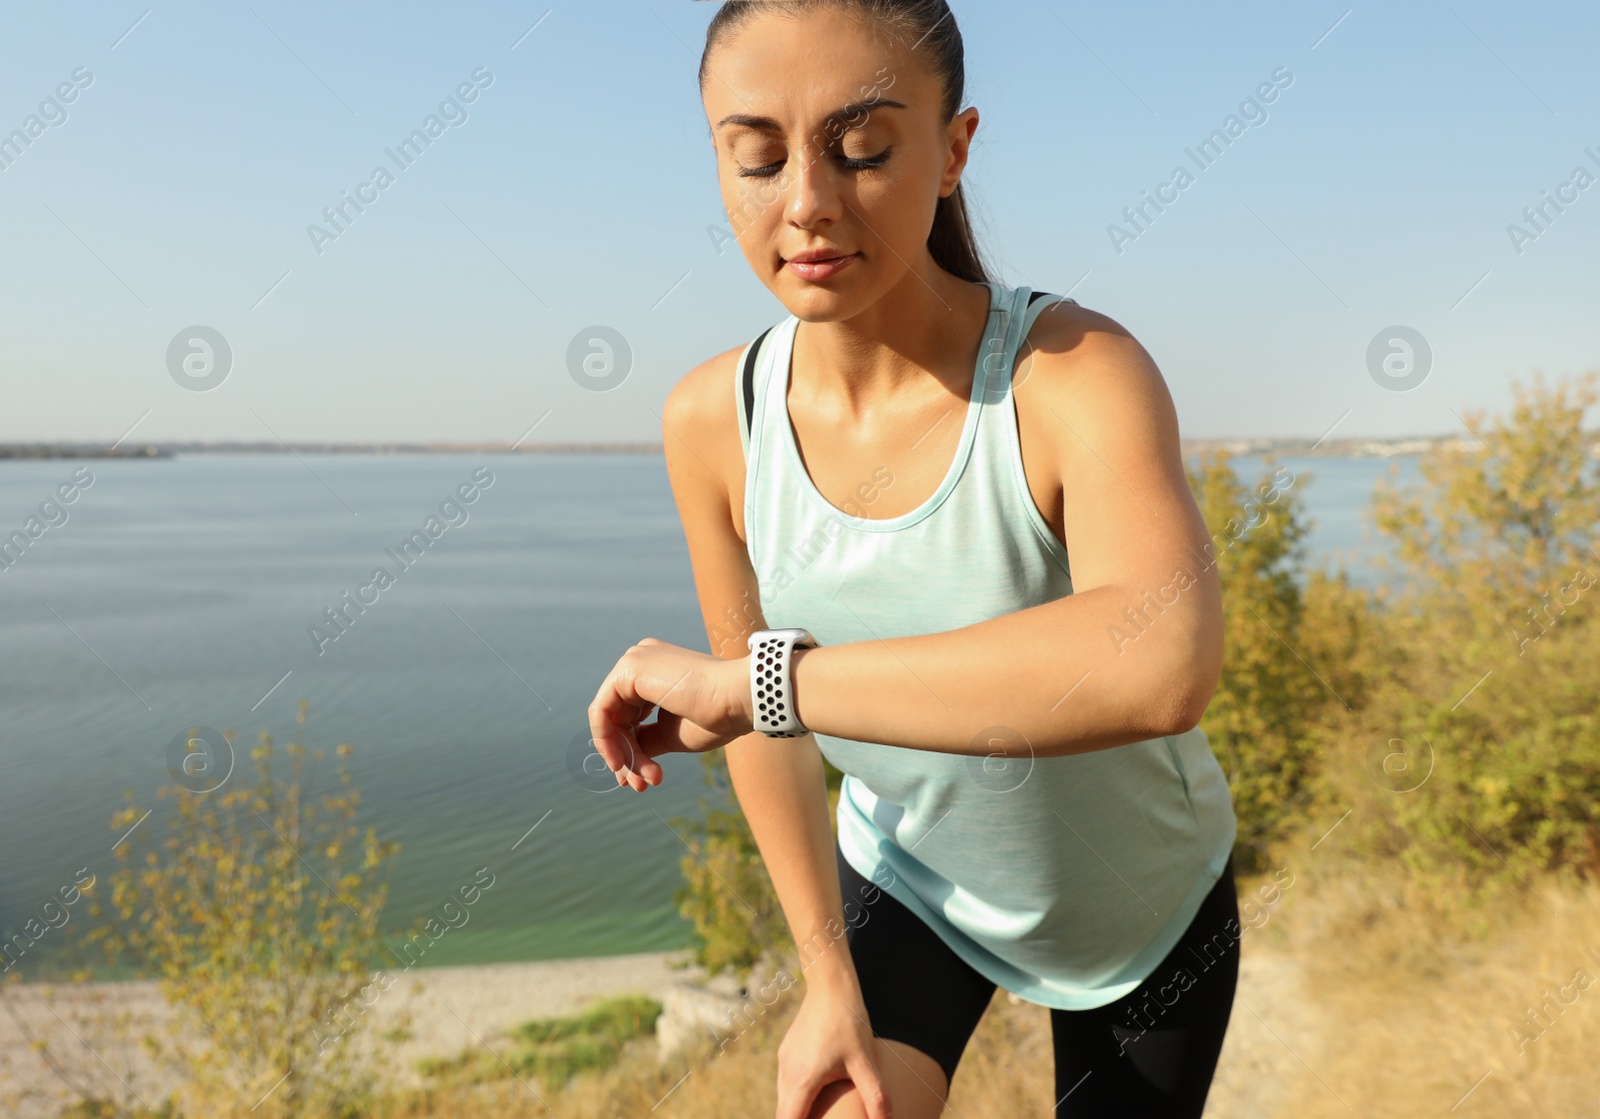 Photo of Woman checking modern smart watch during training outdoors